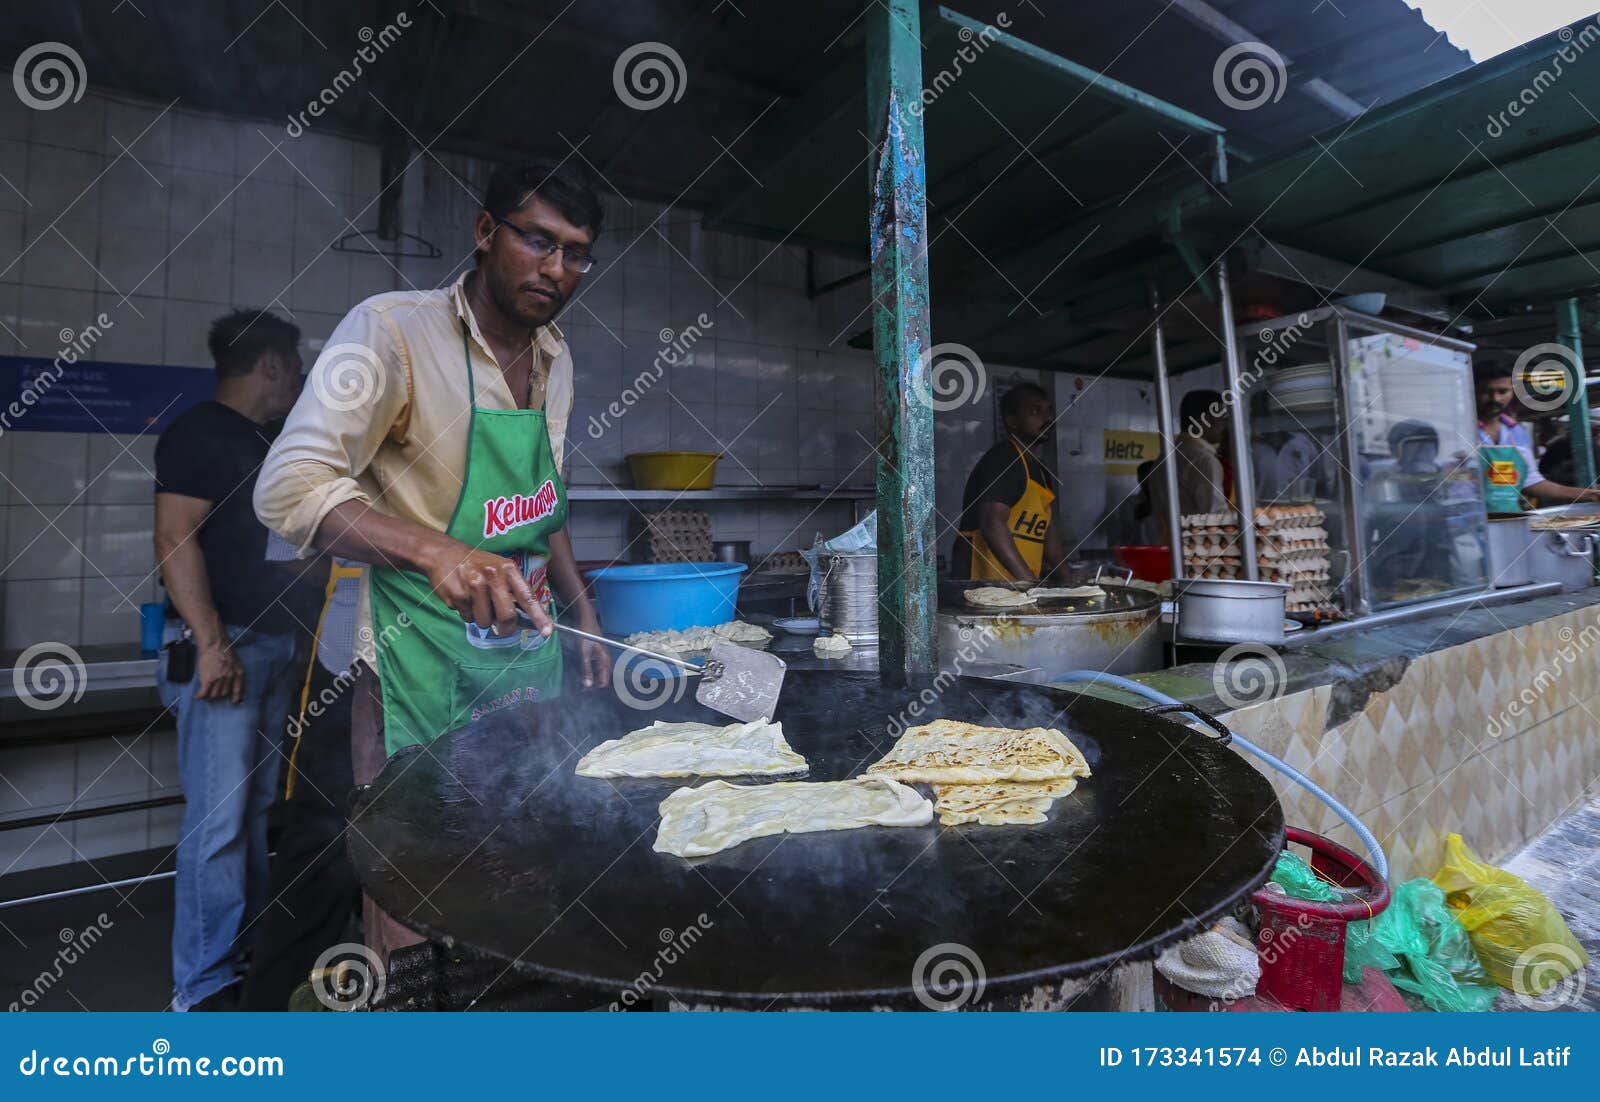 Transfer Road Roti Canai editorial stock image. Image of place - 173341574